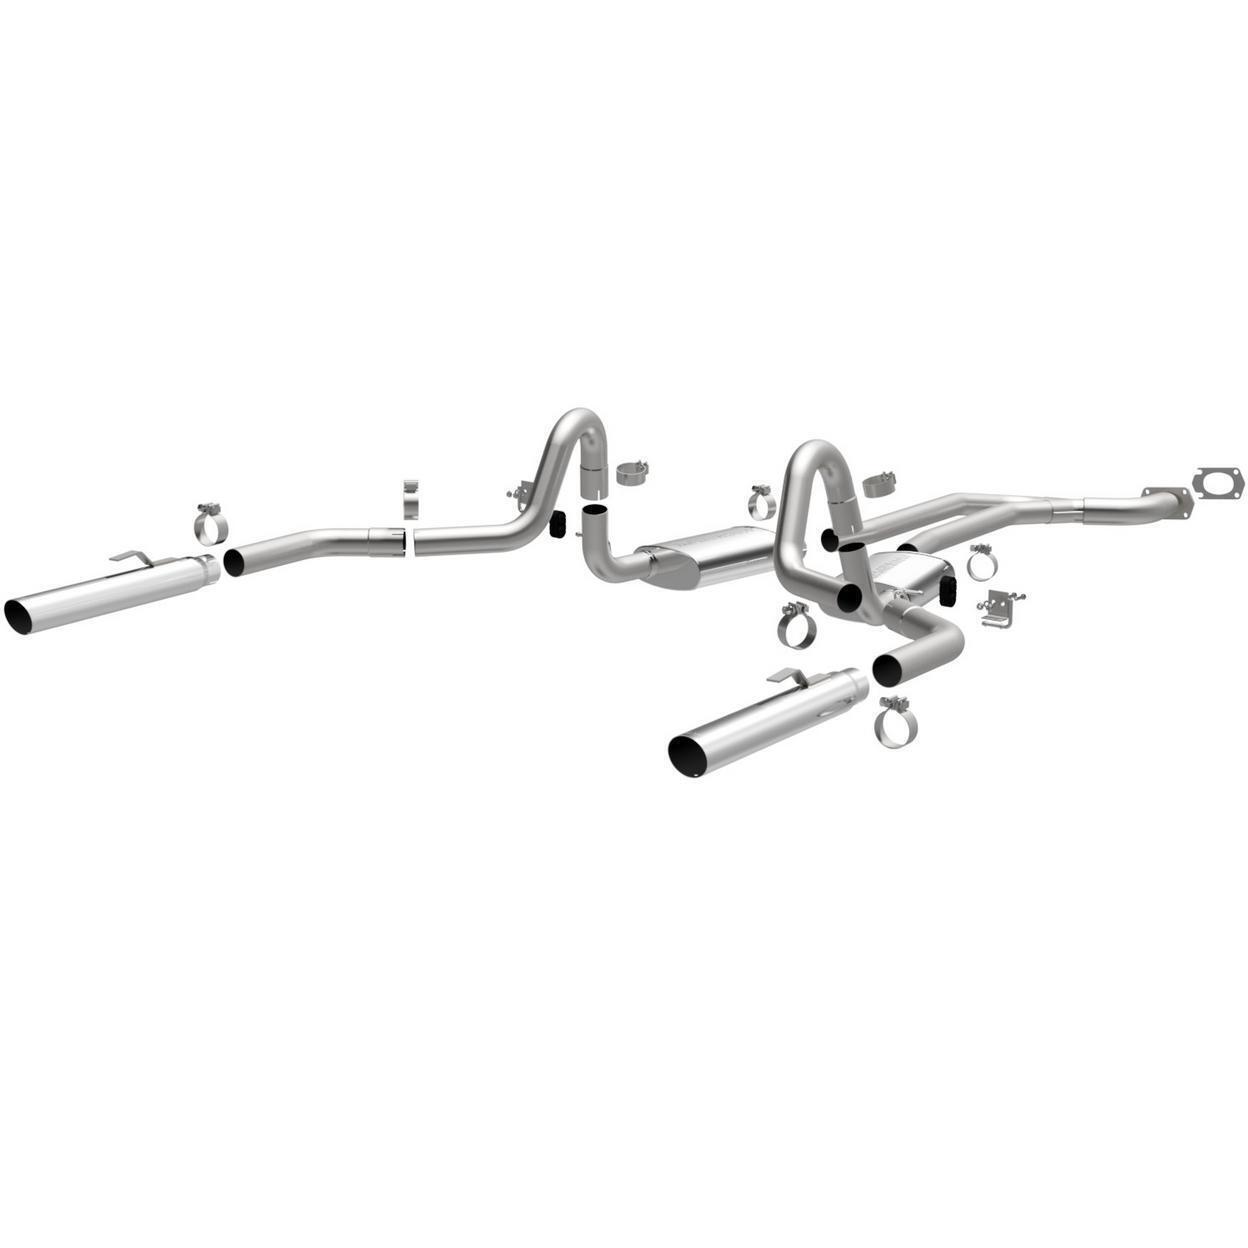 Magnaflow Exhaust System Kit for 1988 Chevrolet Monte Carlo